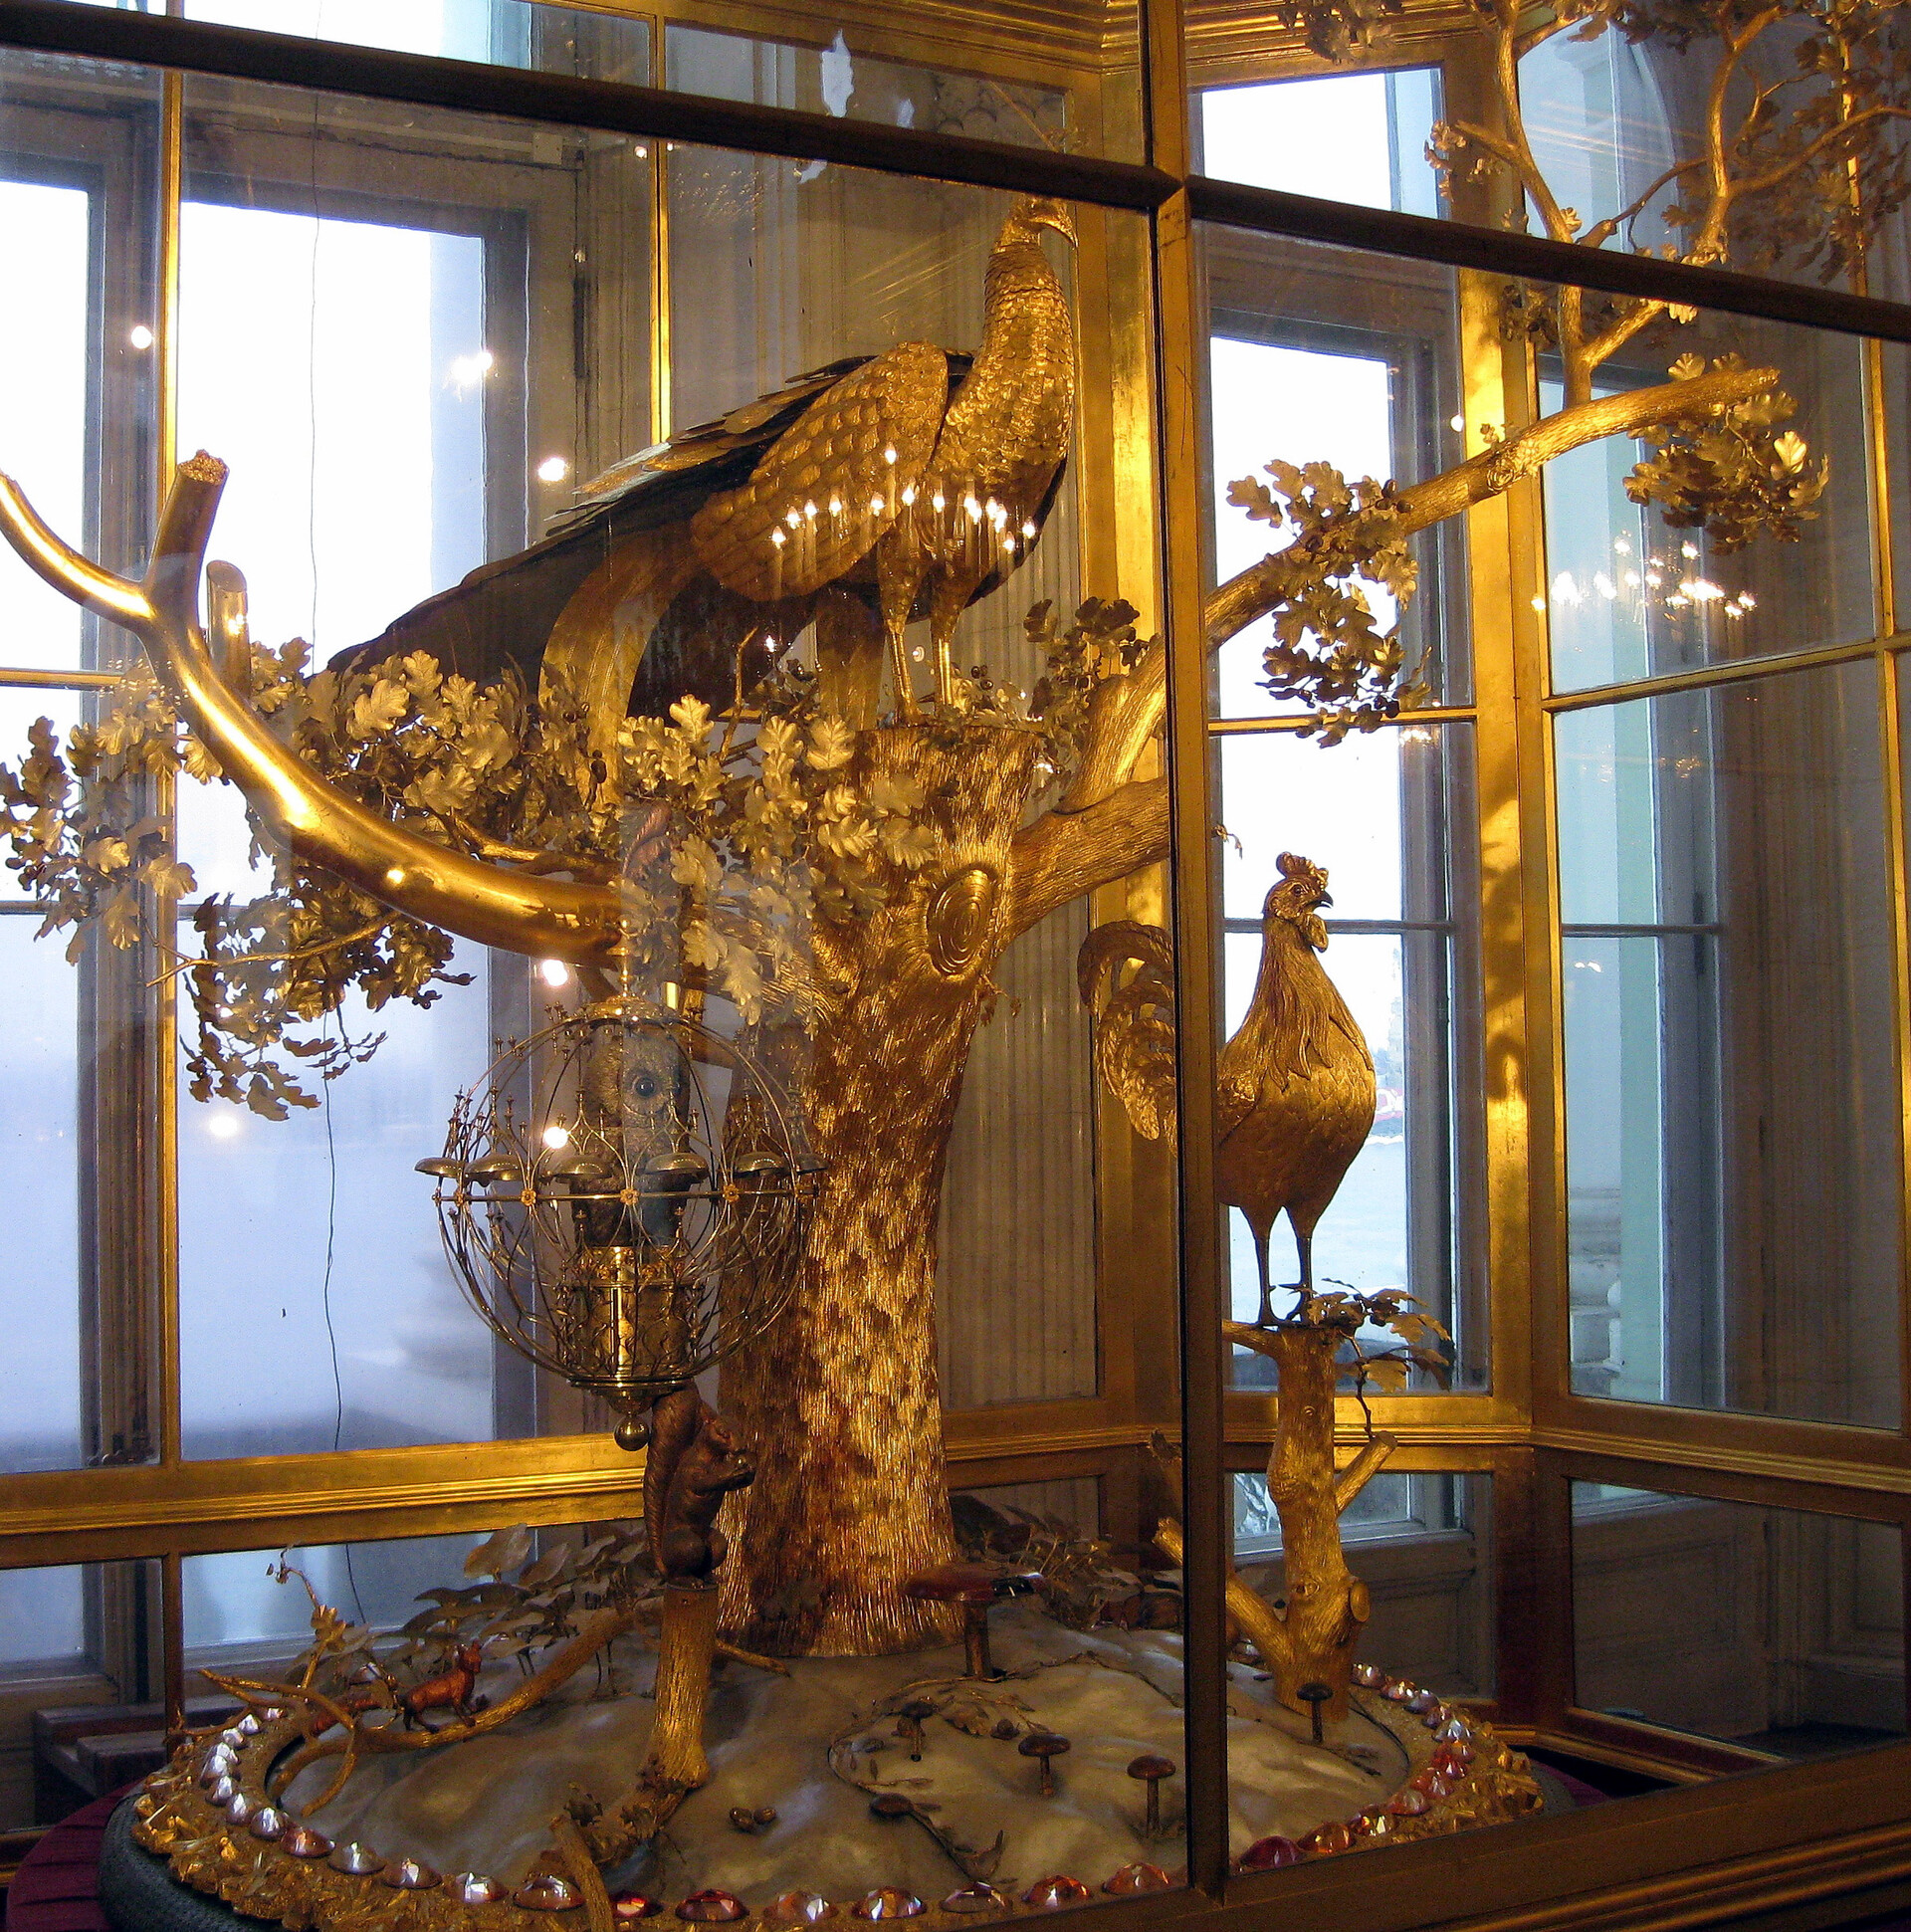 The Peacock Clock in the Pavilion Hall of the Hermitage Museum.